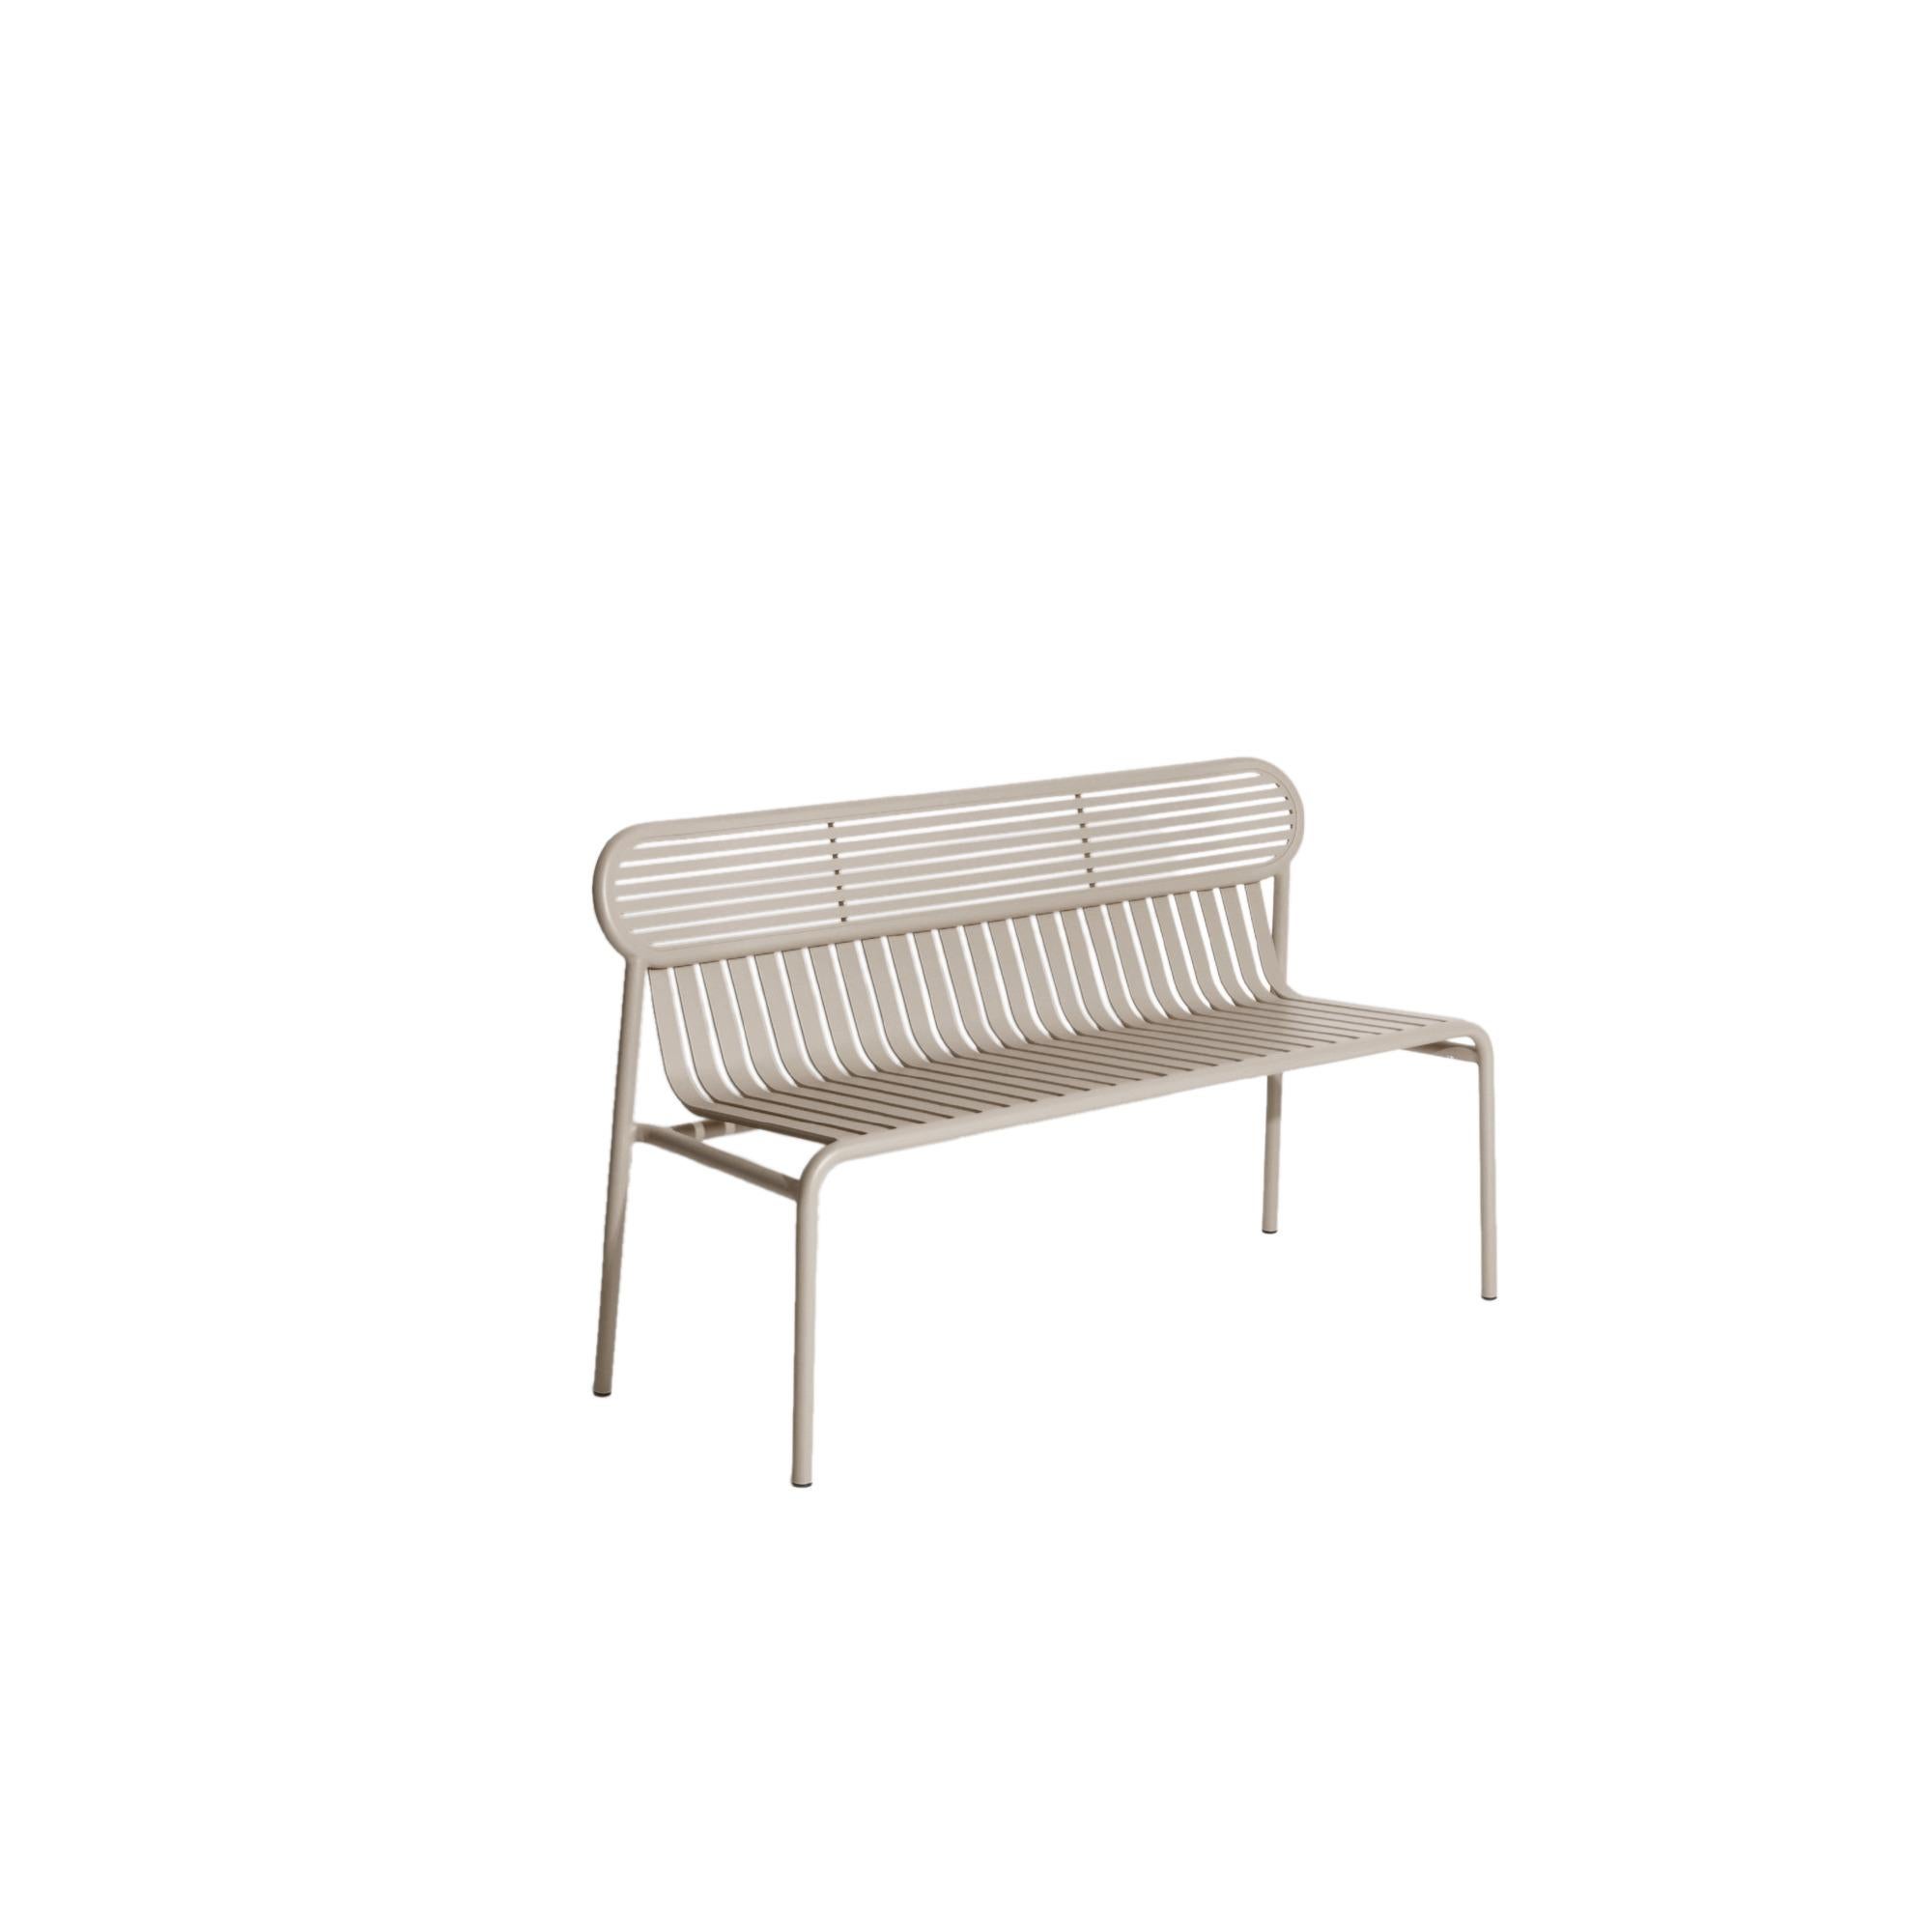 Petite Friture Week-End Bench in Dune Aluminium by Studio BrichetZiegler, 2017

The week-end collection is a full range of outdoor furniture, in aluminium grained epoxy paint, matt finish, that includes 18 functions and 8 colours for the retail